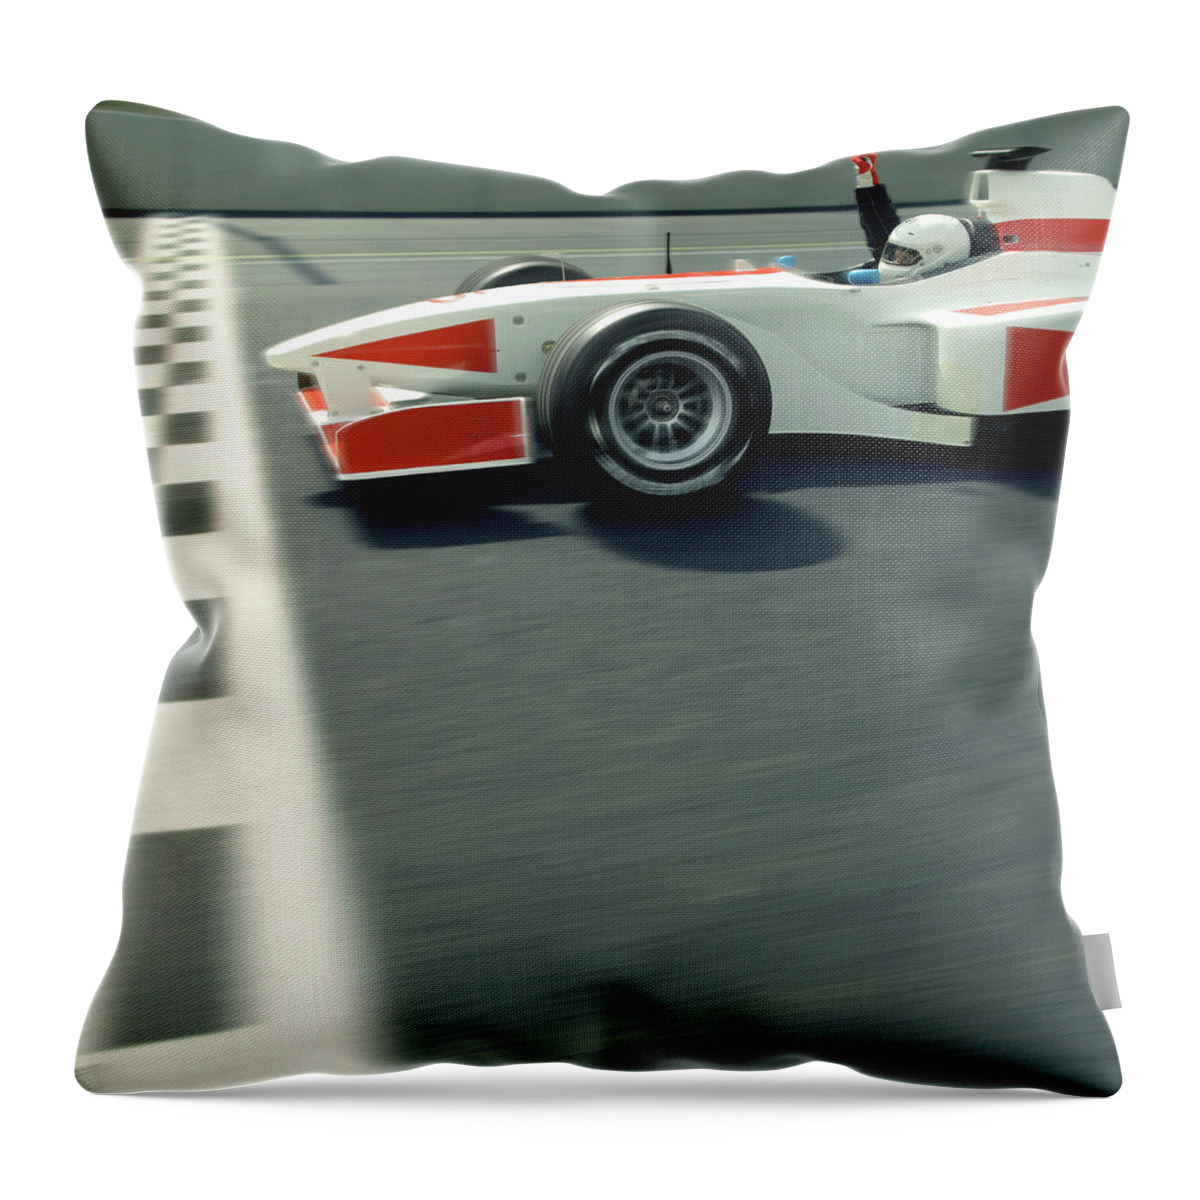 Aerodynamic Throw Pillow featuring the photograph Racing Driver Crossing Finishing Line by Alan Thornton